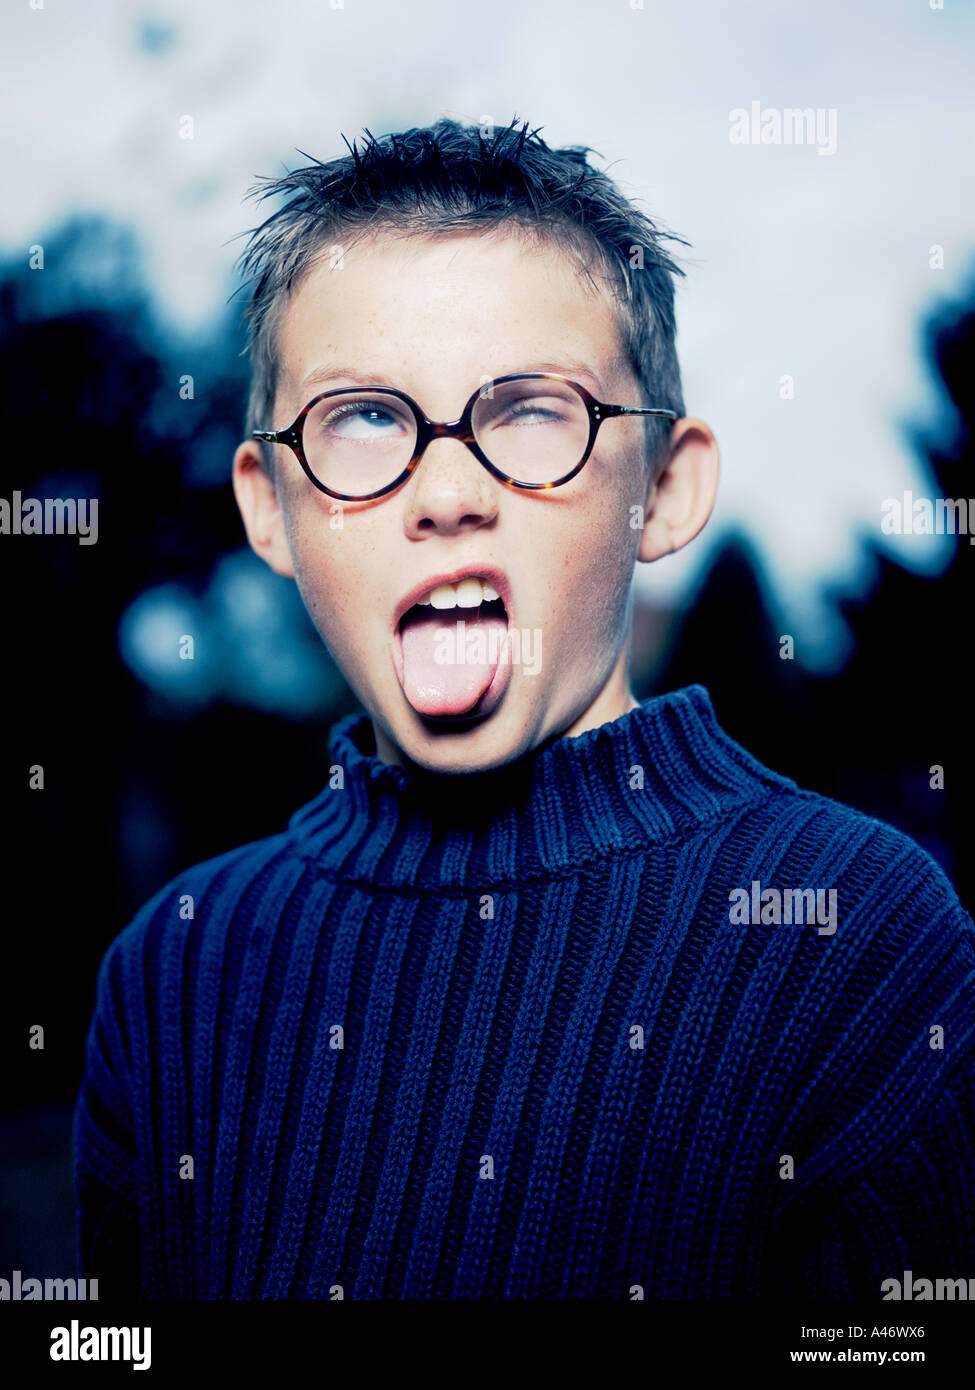 A young boy putting on a goofy face Stock Photo